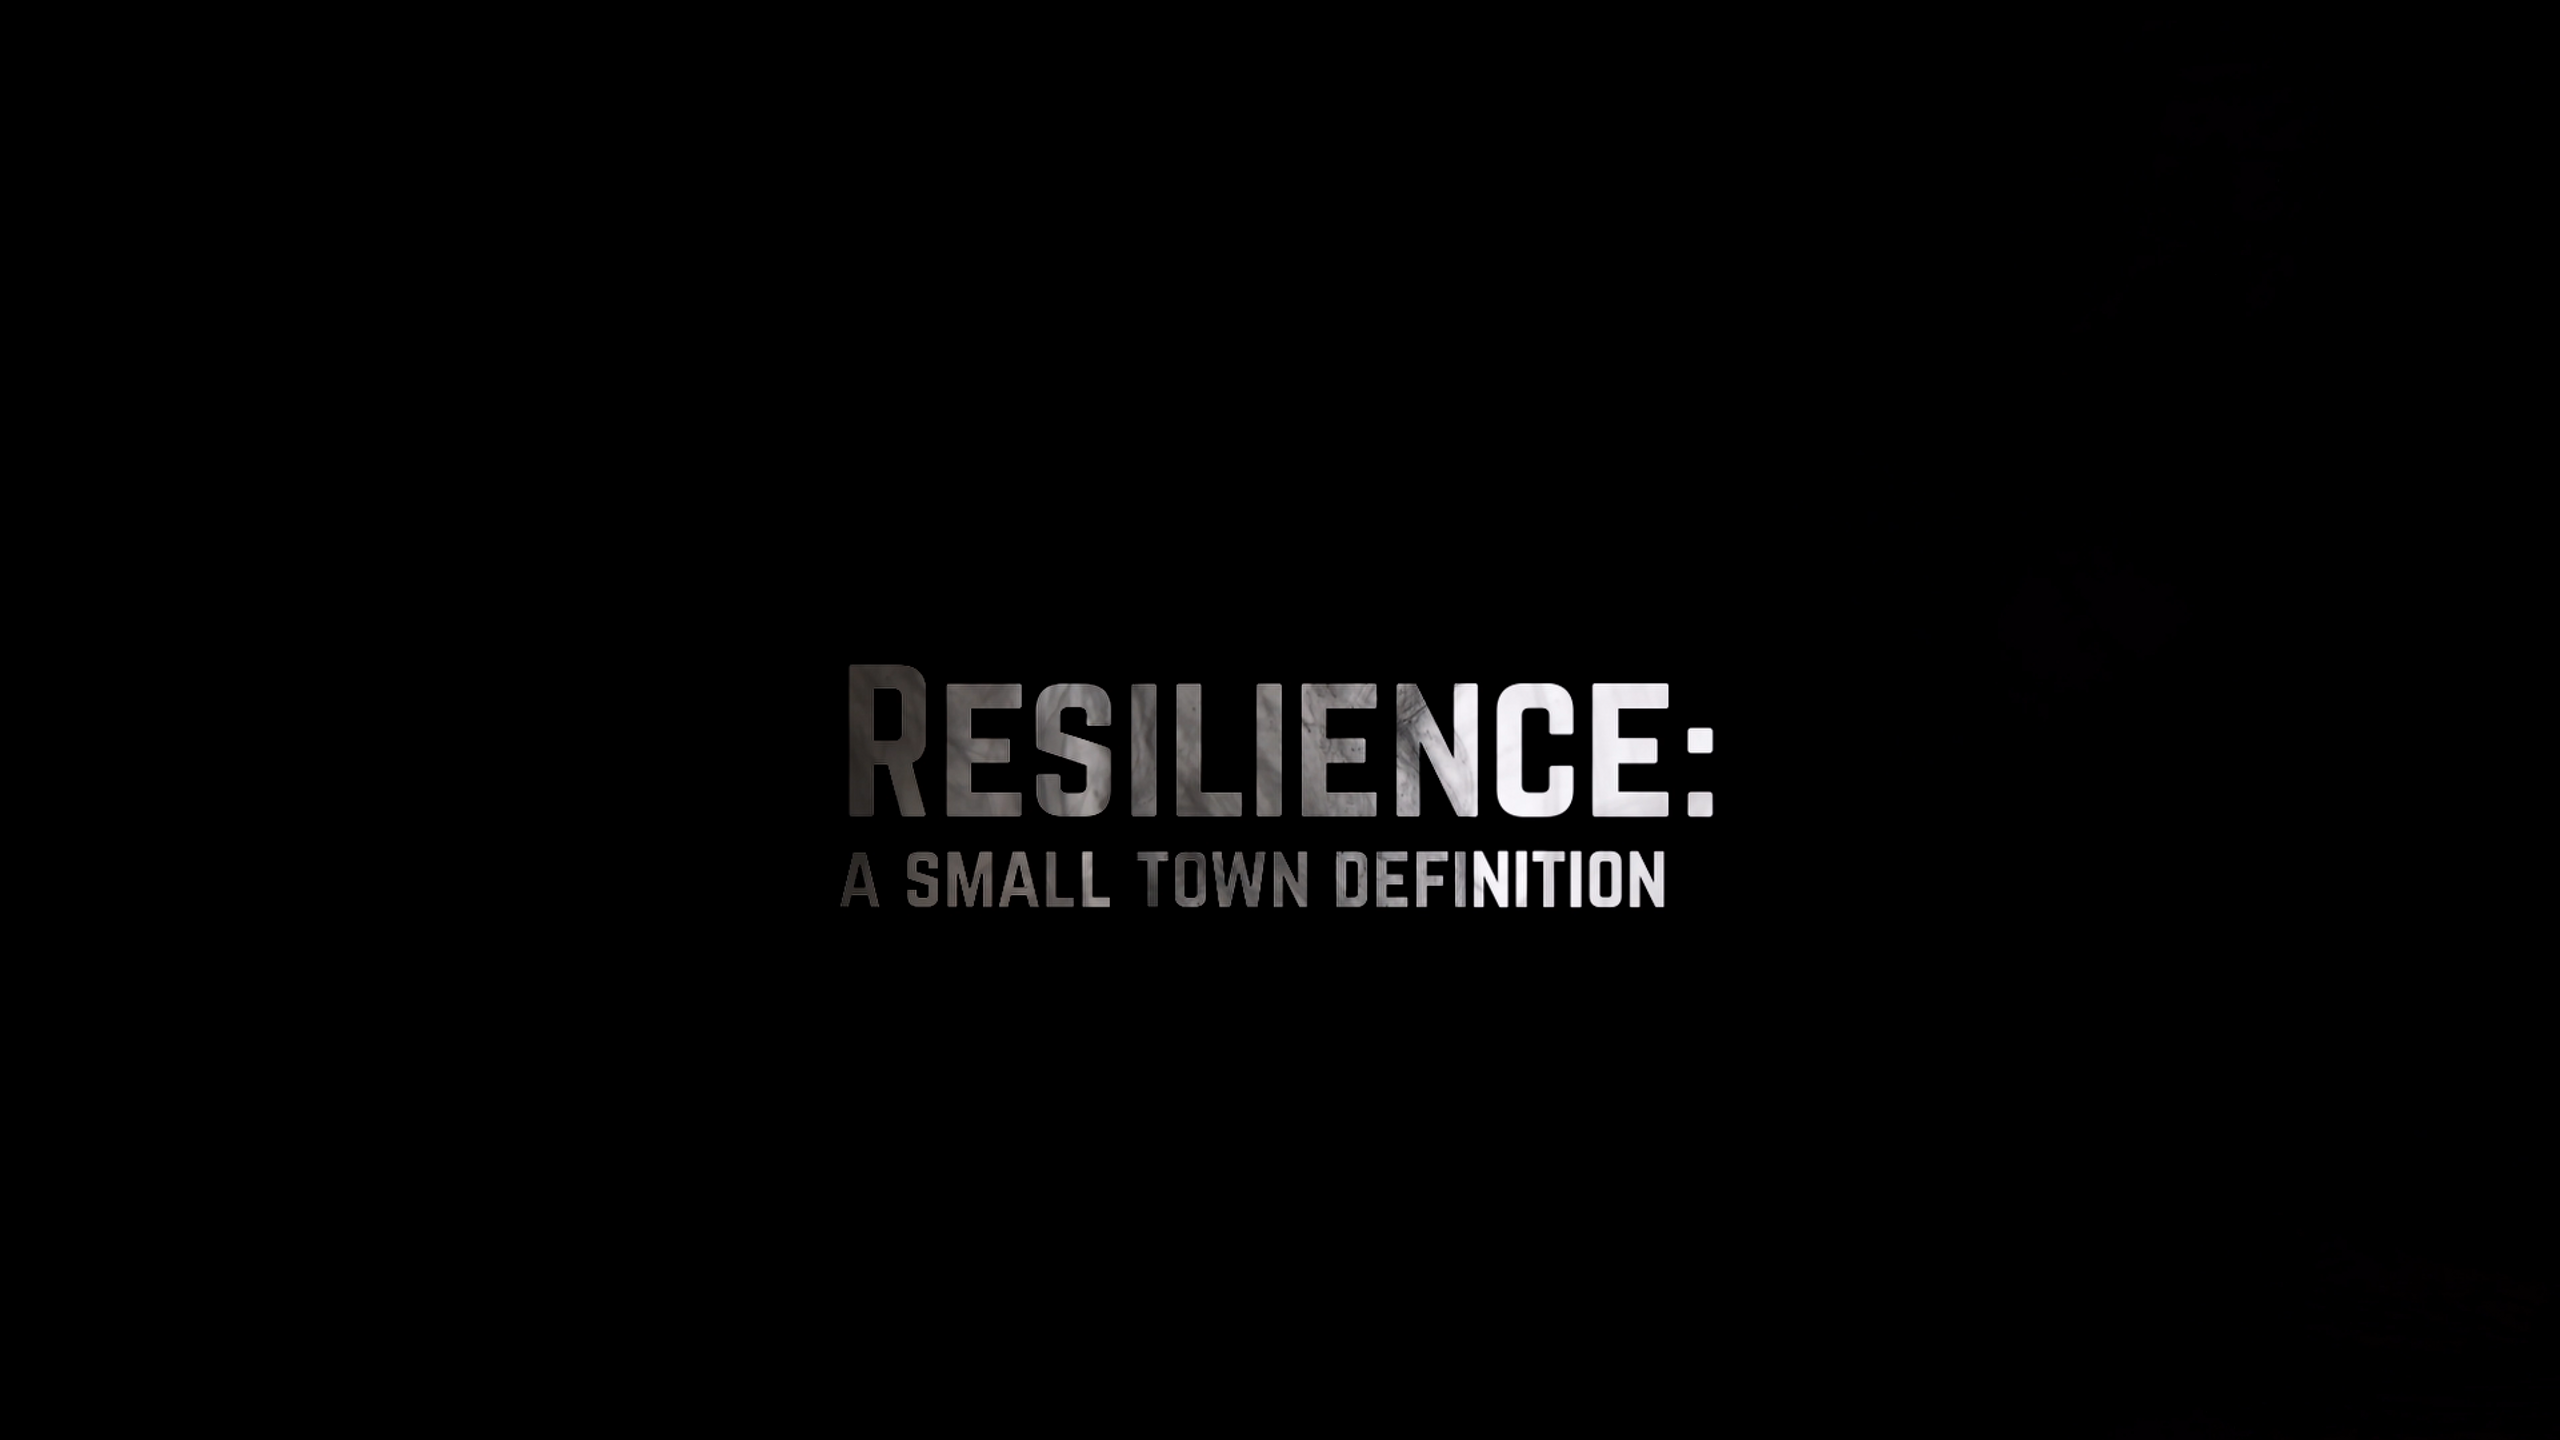 Resilience - A Small Town Definition